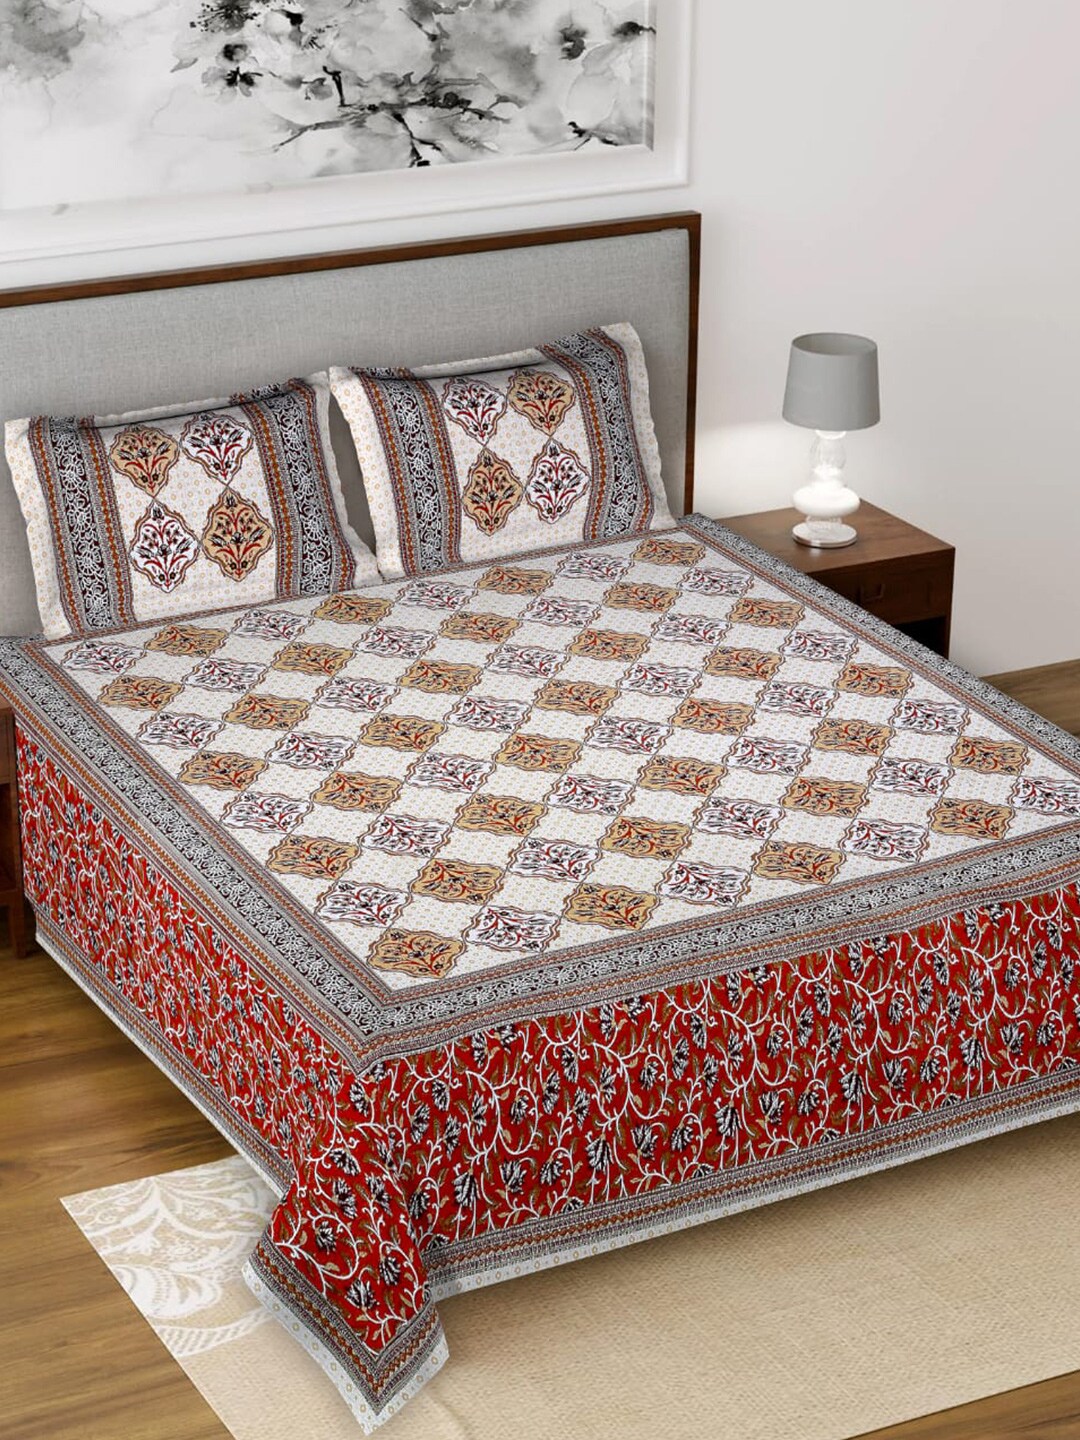 Salona Bichona Grey & Brown Ethnic Motifs 120 TC King Bedsheet with 2 Pillow Covers Price in India